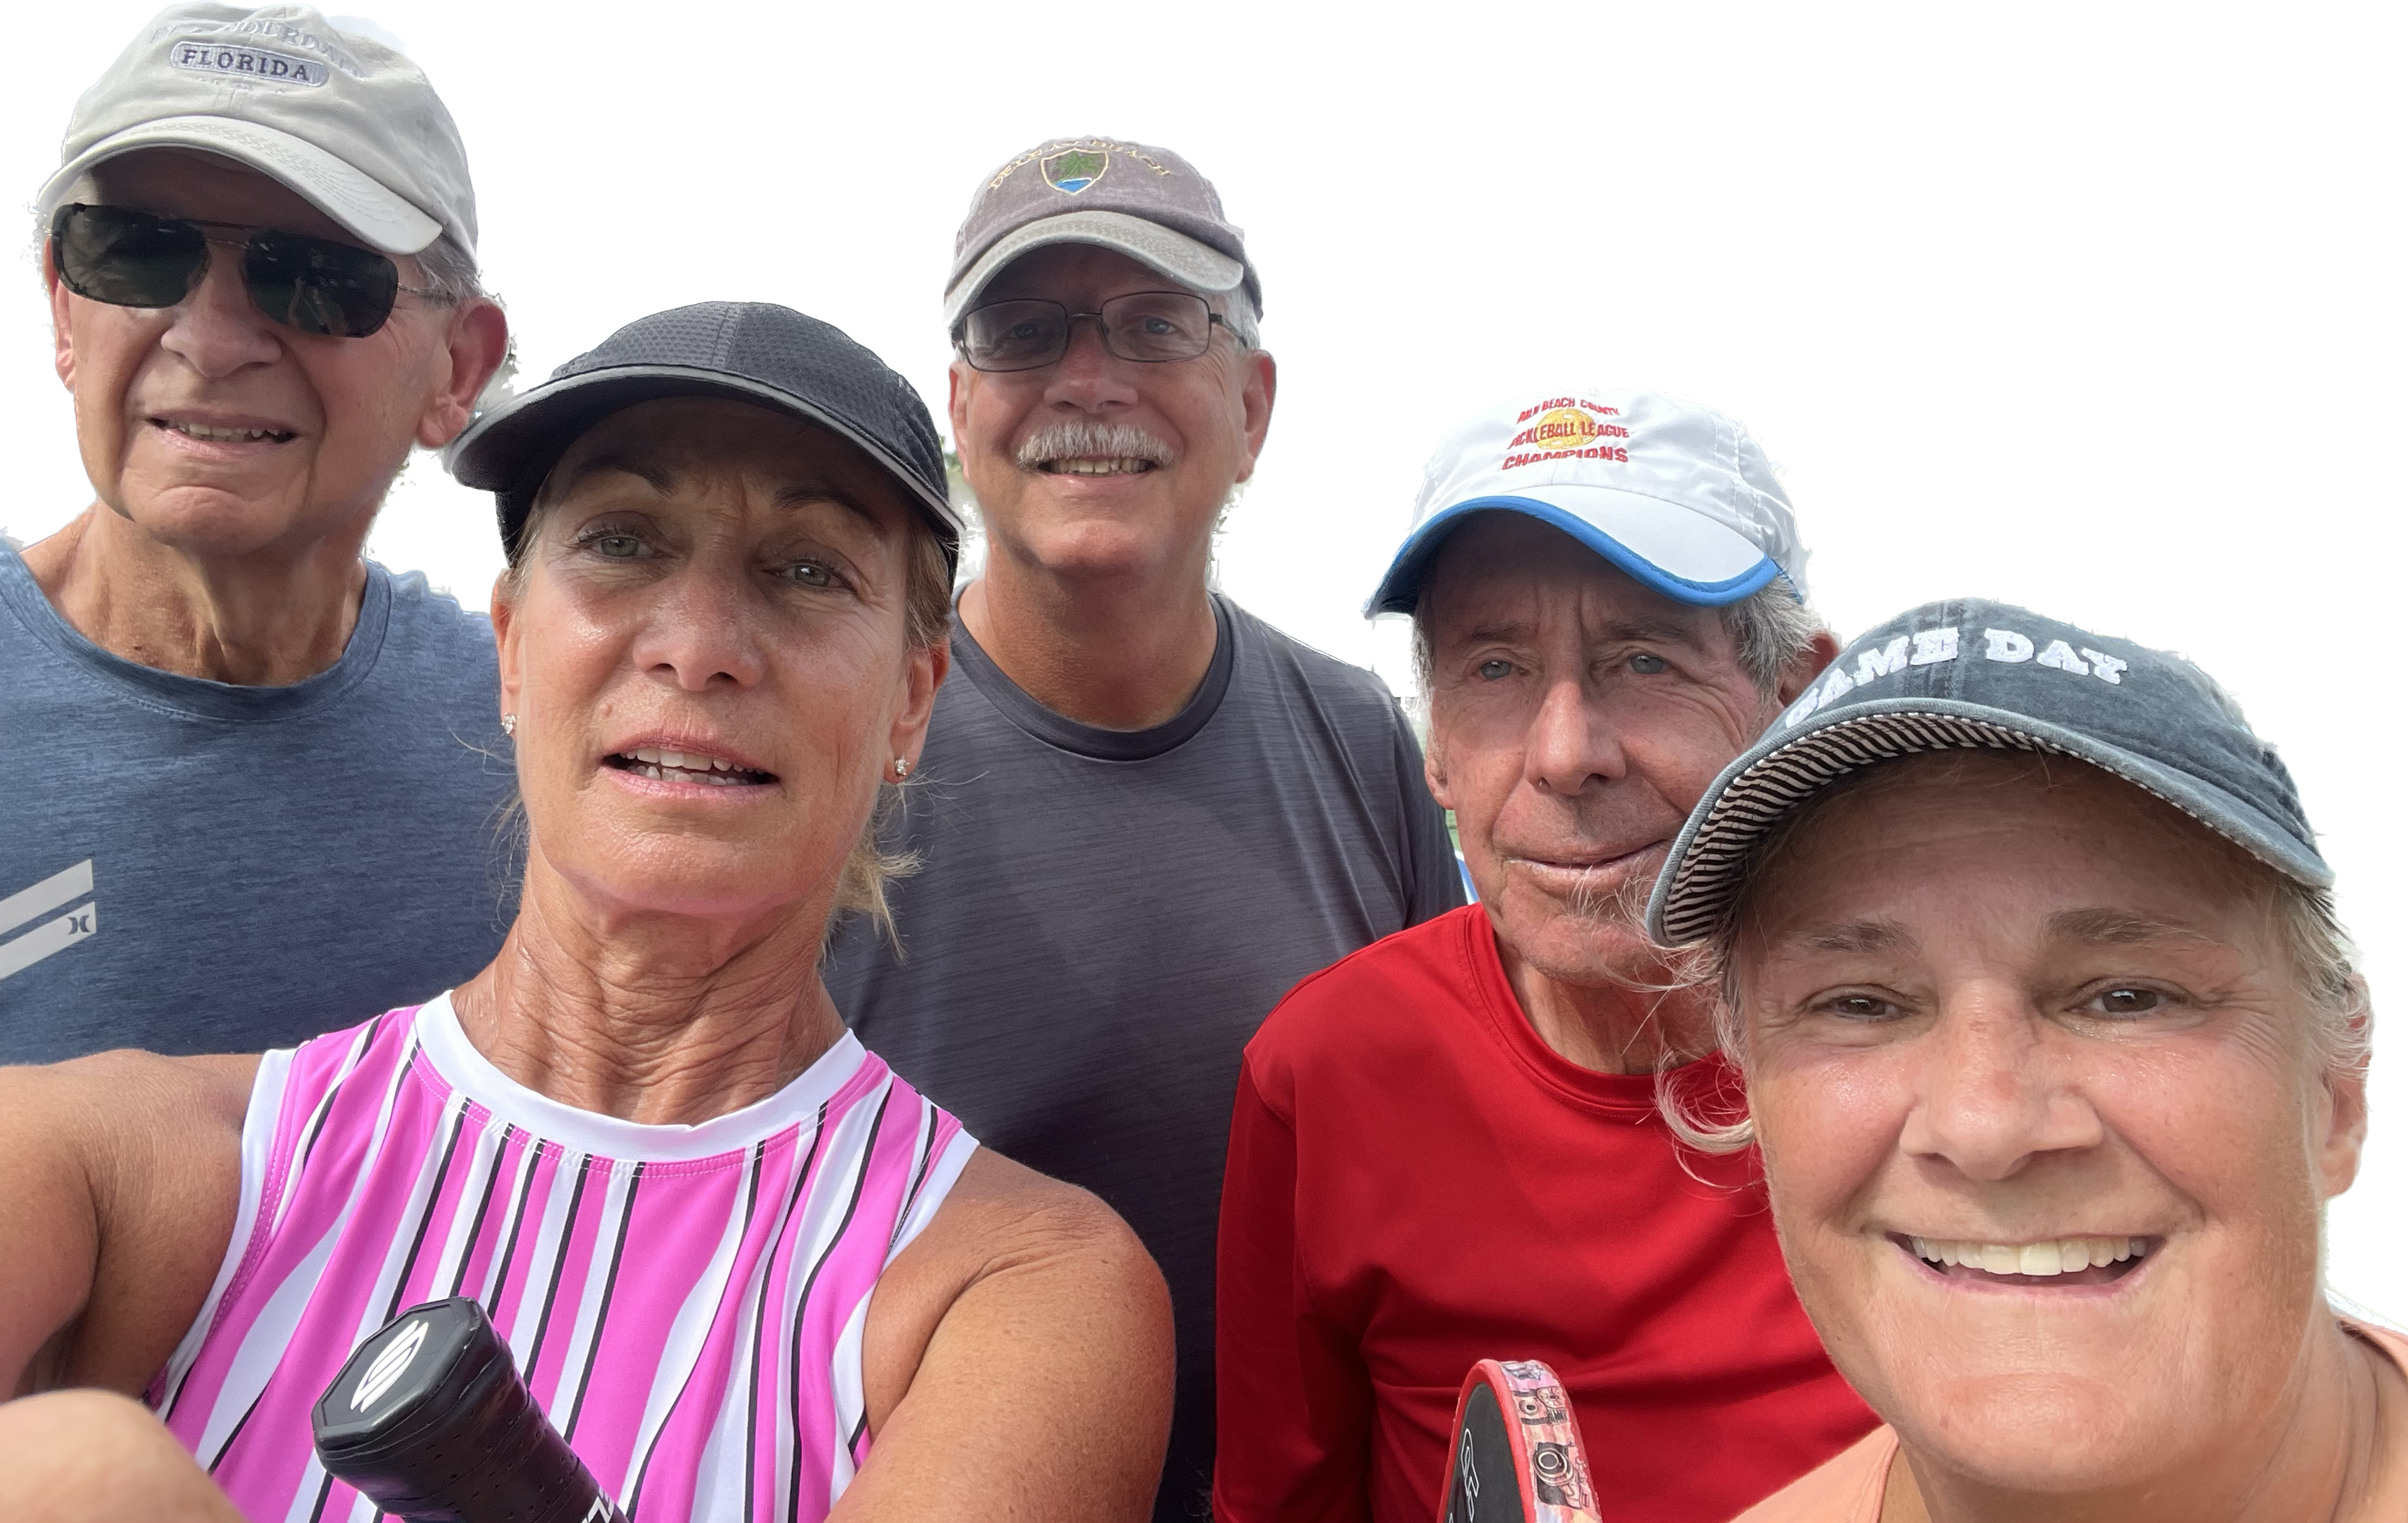 Bob with Kathy, Joe, Jackie, and Paul after an Intermediate Pickleball Clinic in Delray Beach, FL